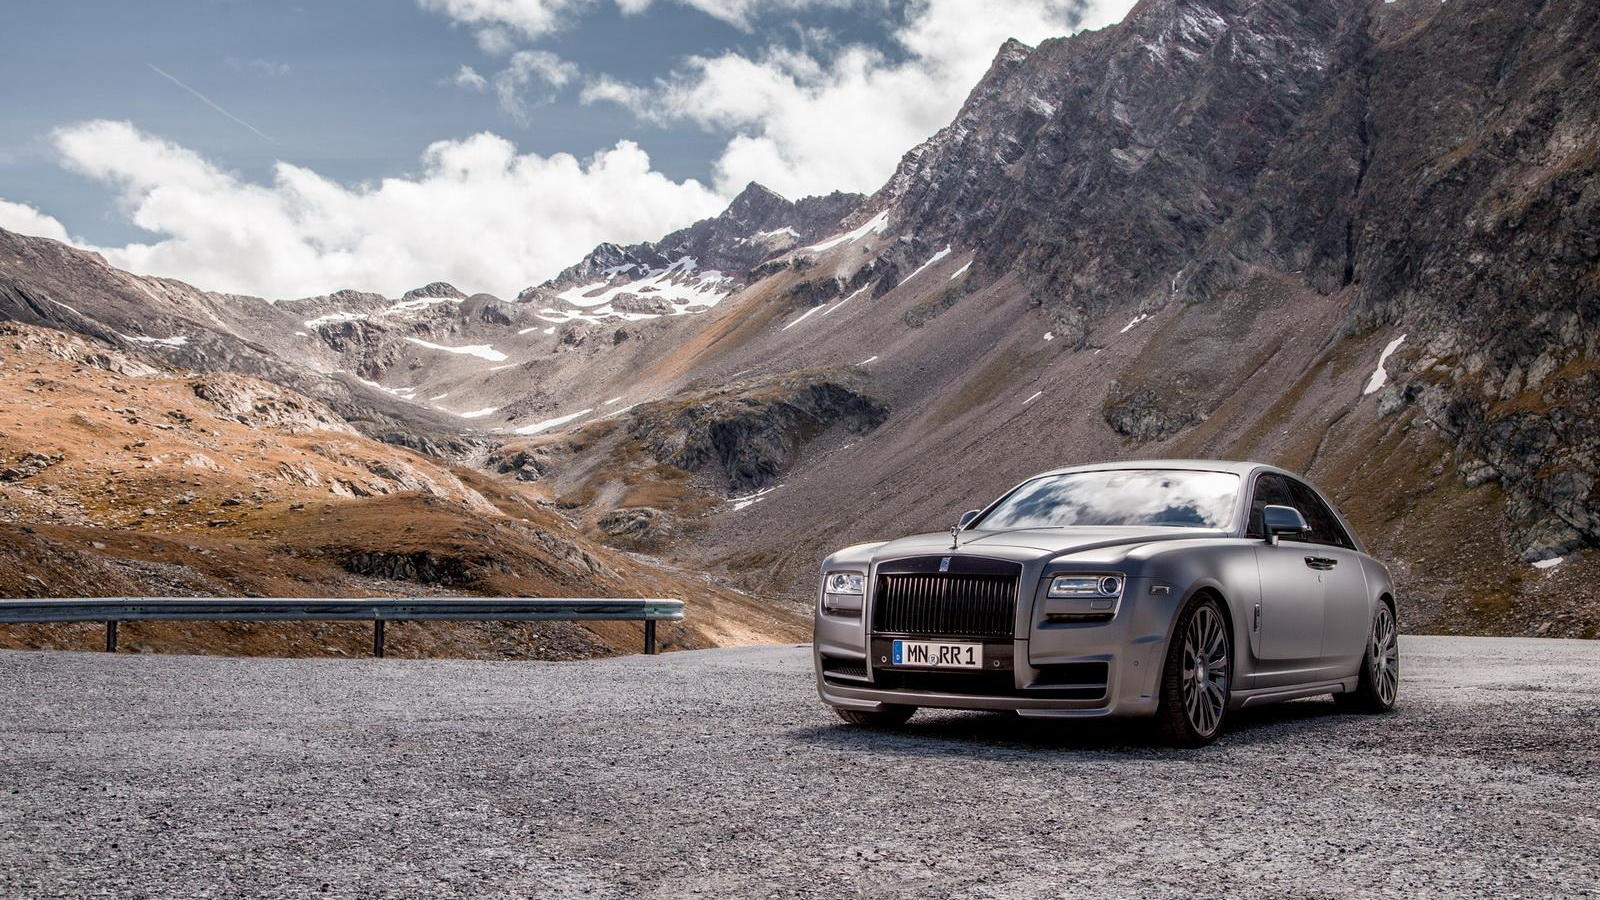 Rolls-Royce Ghost Black Badge By Spofec Makes 706 HP, Gets New Face